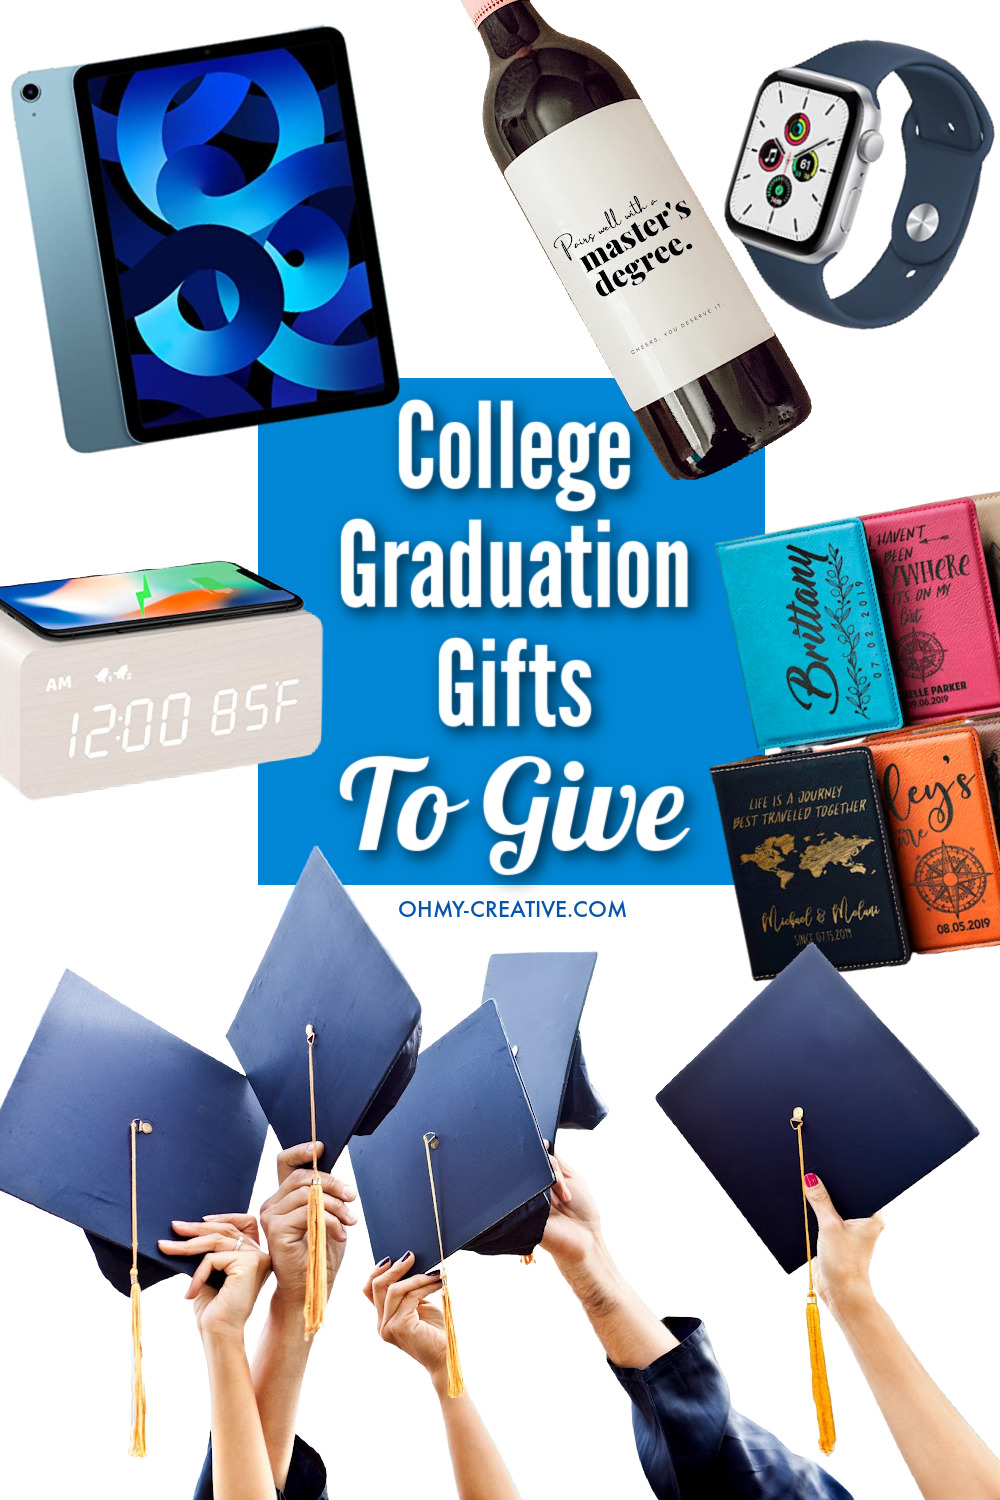 III. Personalized and Customizable Gifts for College Graduates